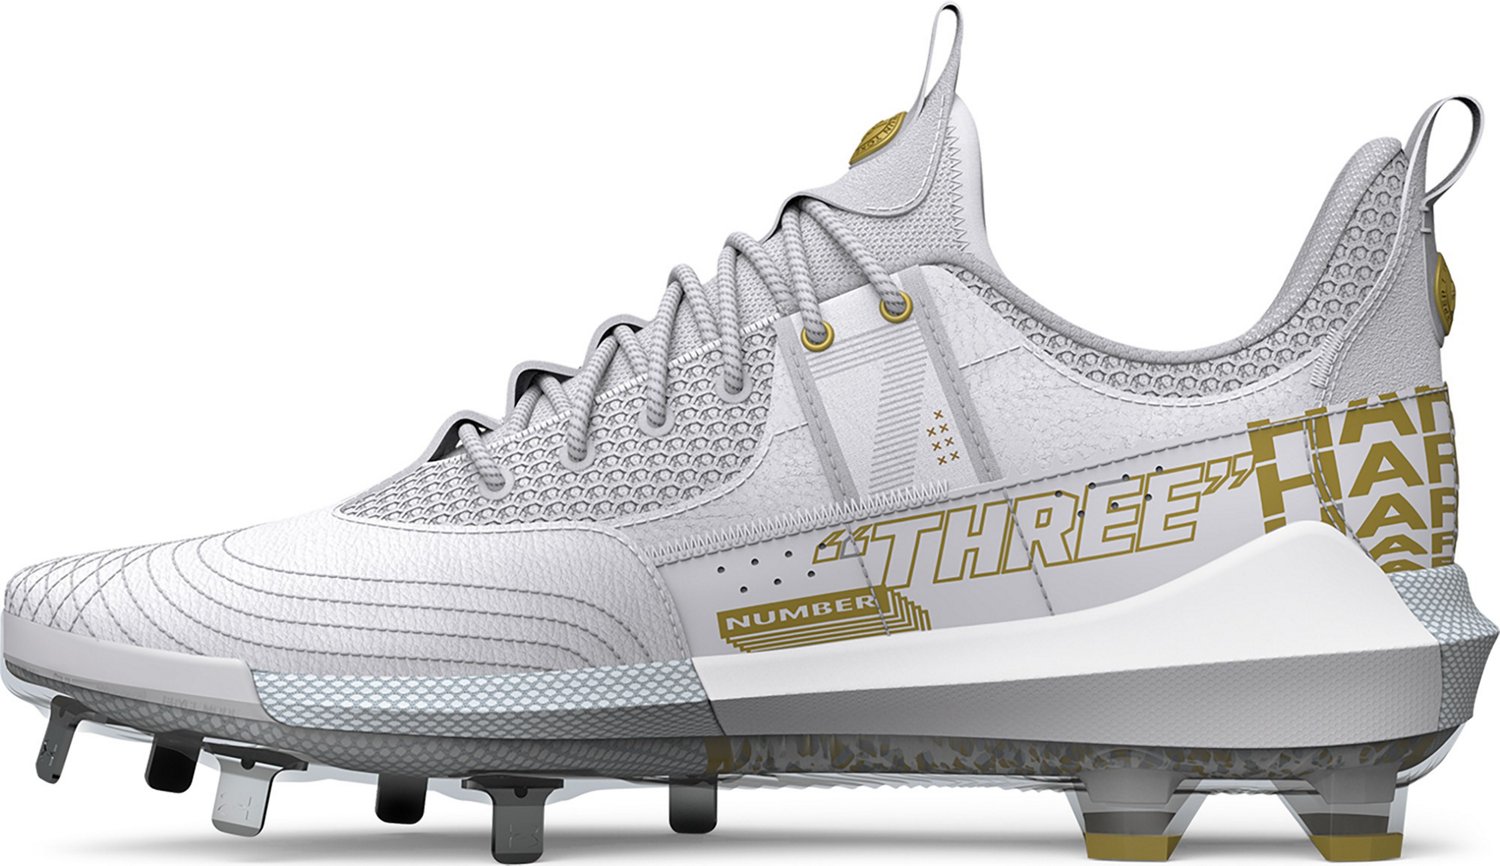 Used Under Armour Bryce Harper Cleats Size 7 – cssportinggoods